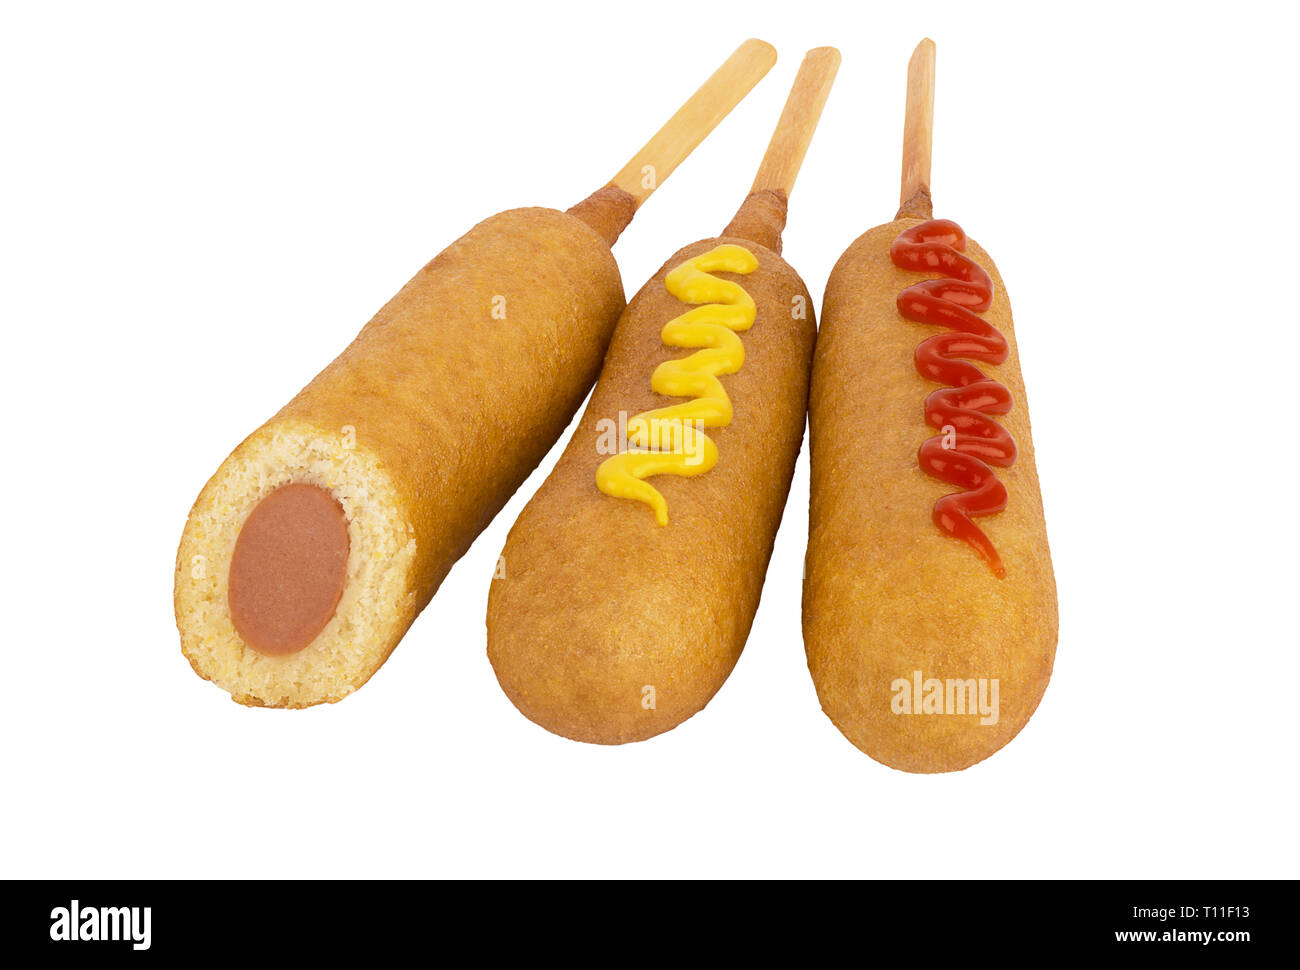 Group of corn dogs isolated on white background. Fast food restaurant concept. Close up. Stock Photo